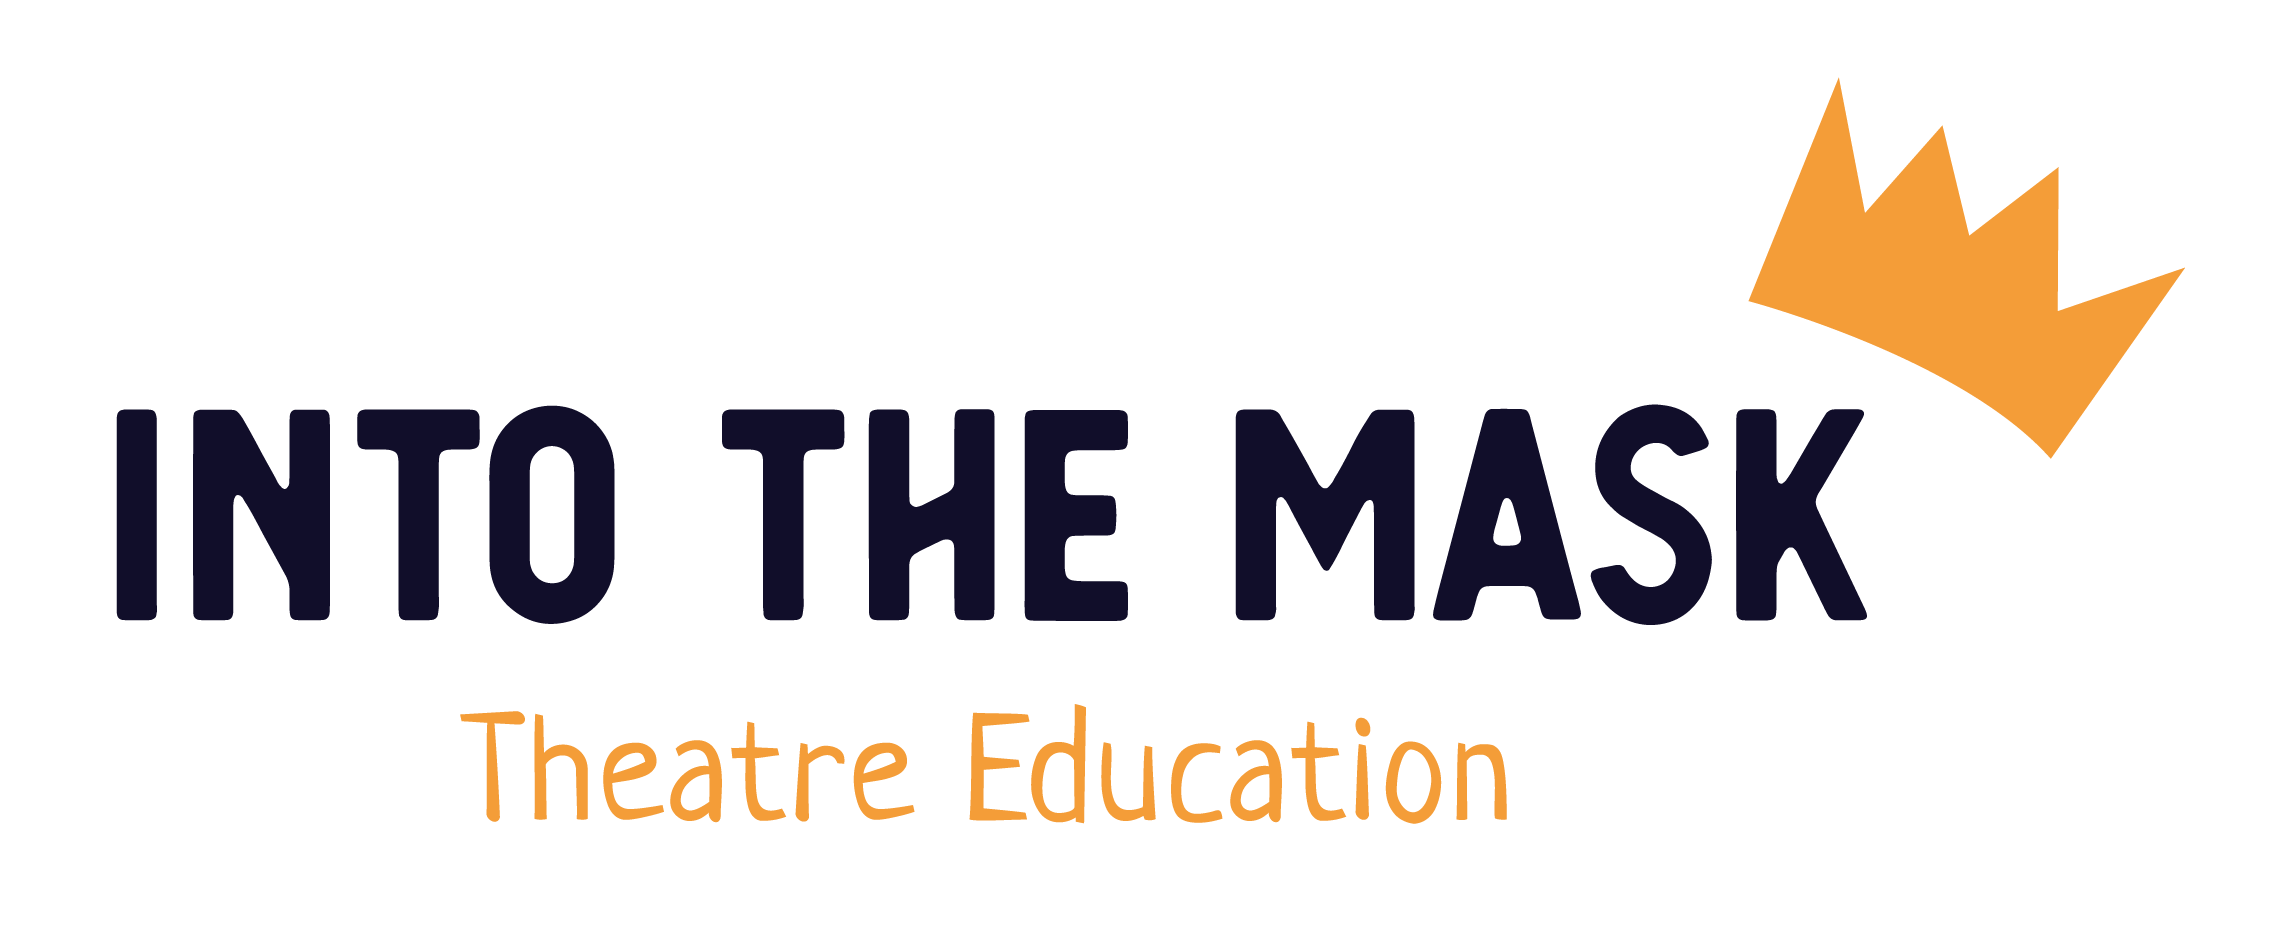 Into the Mask Theatre &amp; Education